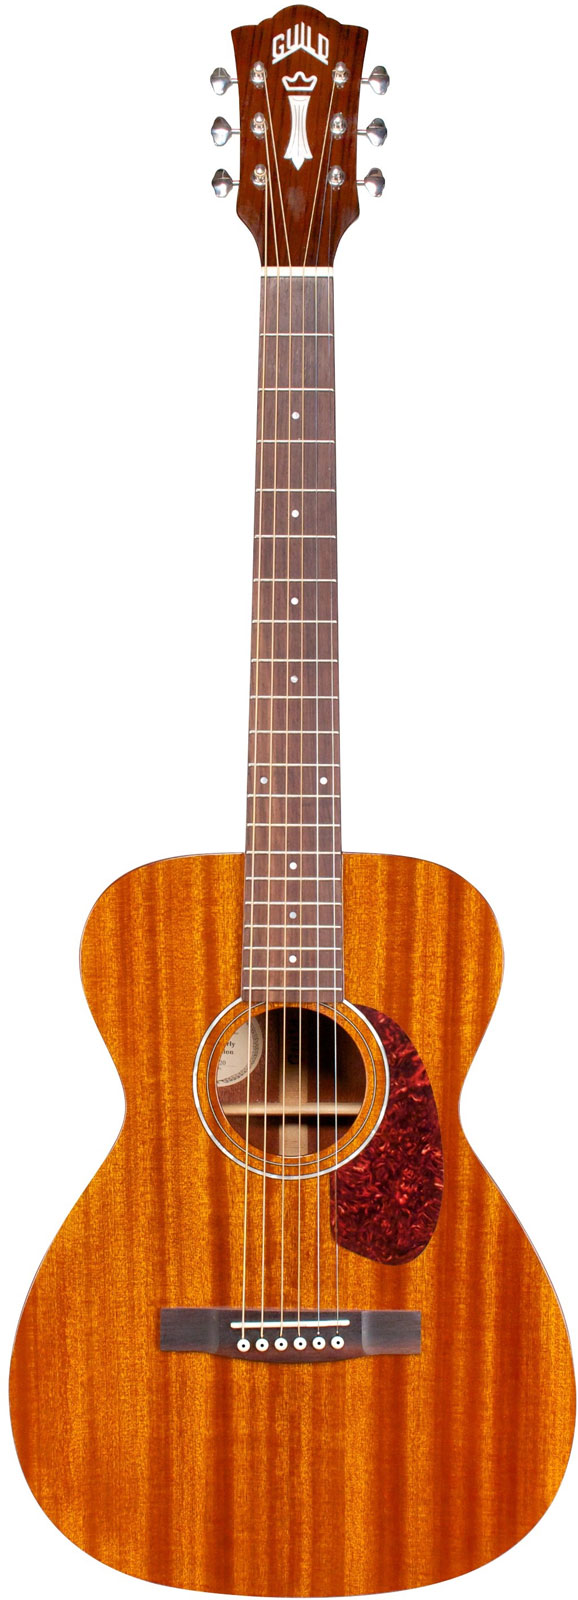 GUILD WESTERLY M-120 NATURAL